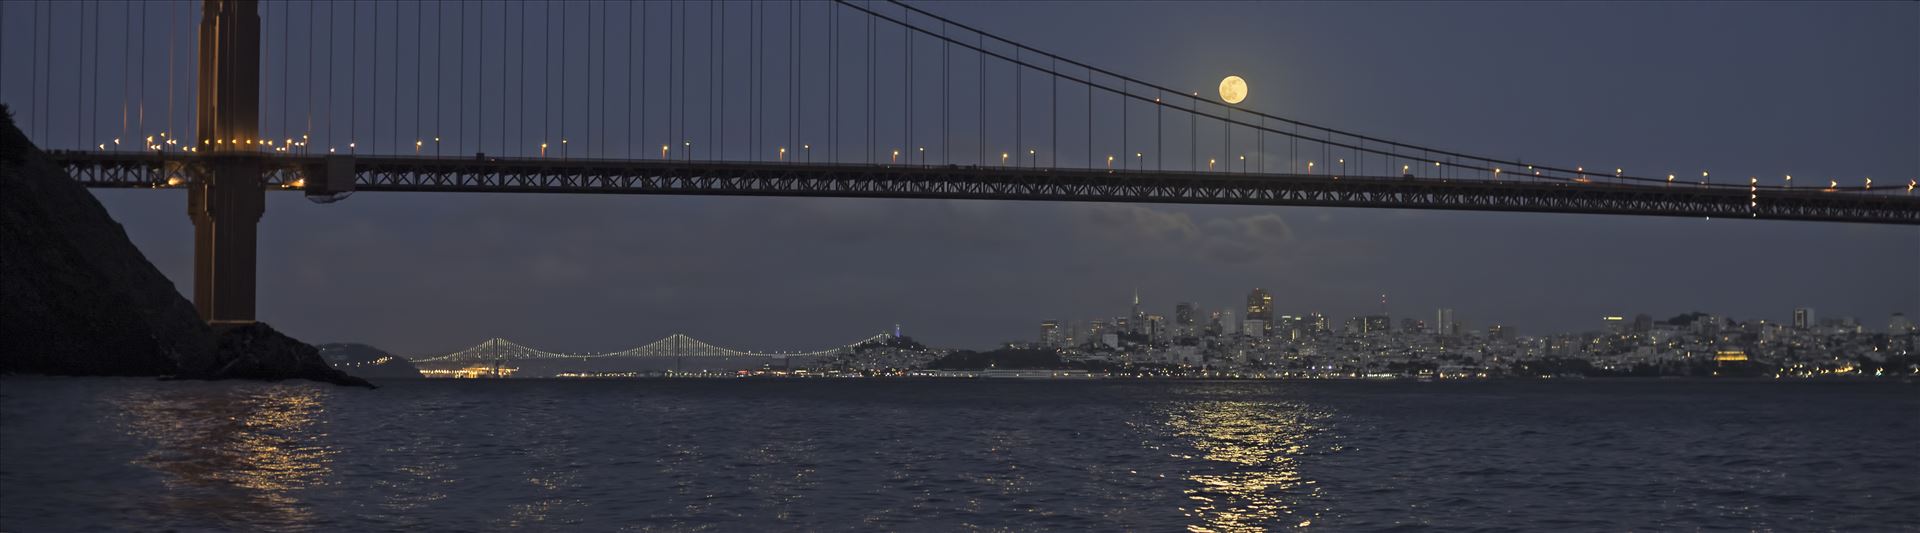 Moonrise Over the City - Moonrise over the Golden Gate Bridge by Denise Buckley Crawford